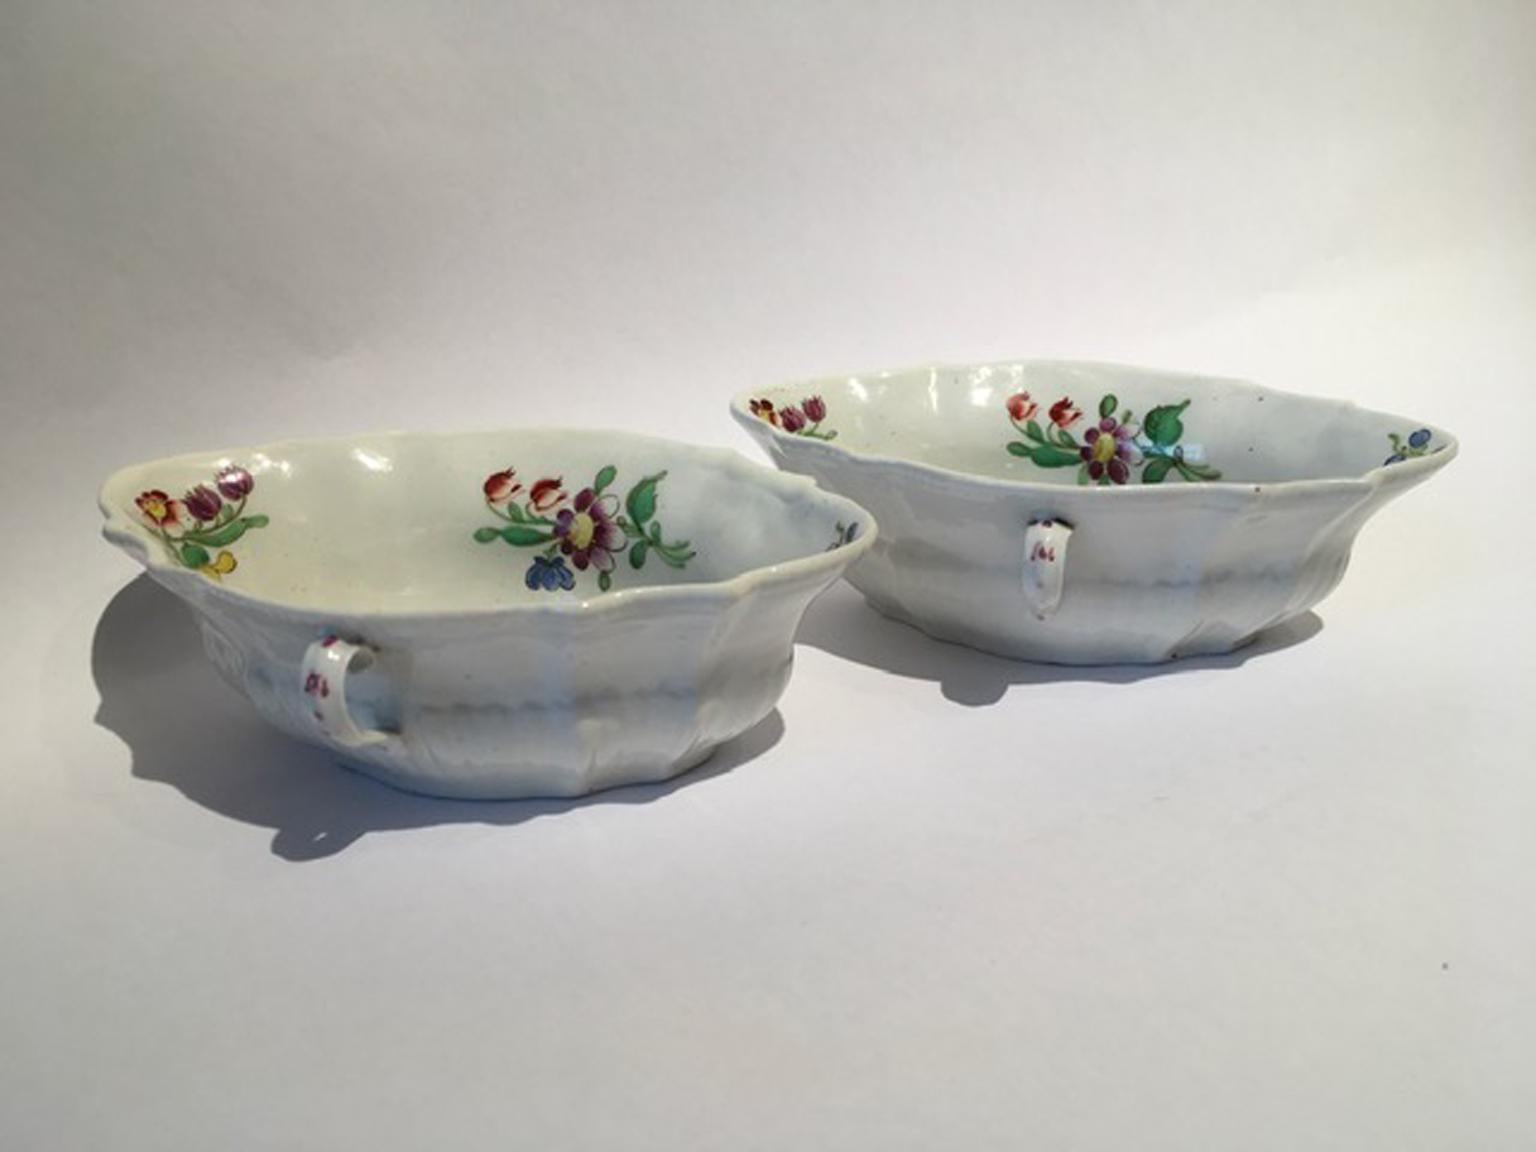 This is an elegant pair of porcelain sauce bowls with floral drawings in red and blue.
It is beautiful for a table dressing or to collect.
The production of this well known Italian factory is most wanted by the best international collectors.

In